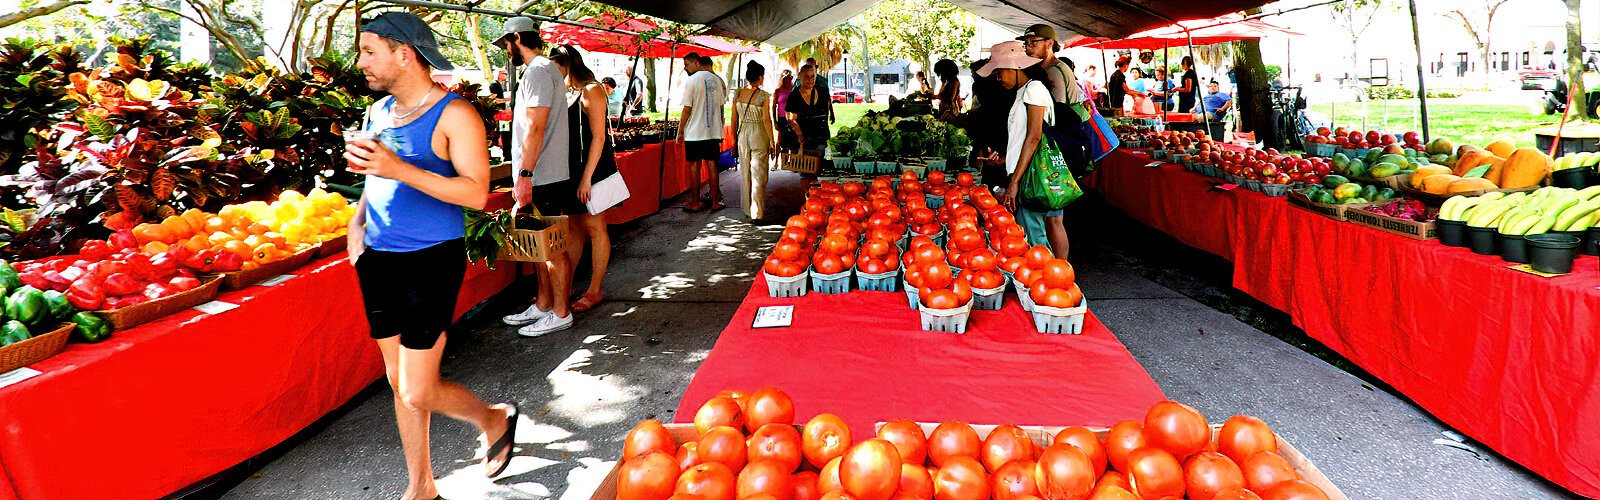 Plenty of fresh produce straight from the farm, plants, flowers, prepared and ready-to-eat food and handmade crafts are available at the Saturday Morning Market in the heart of St. Pete.